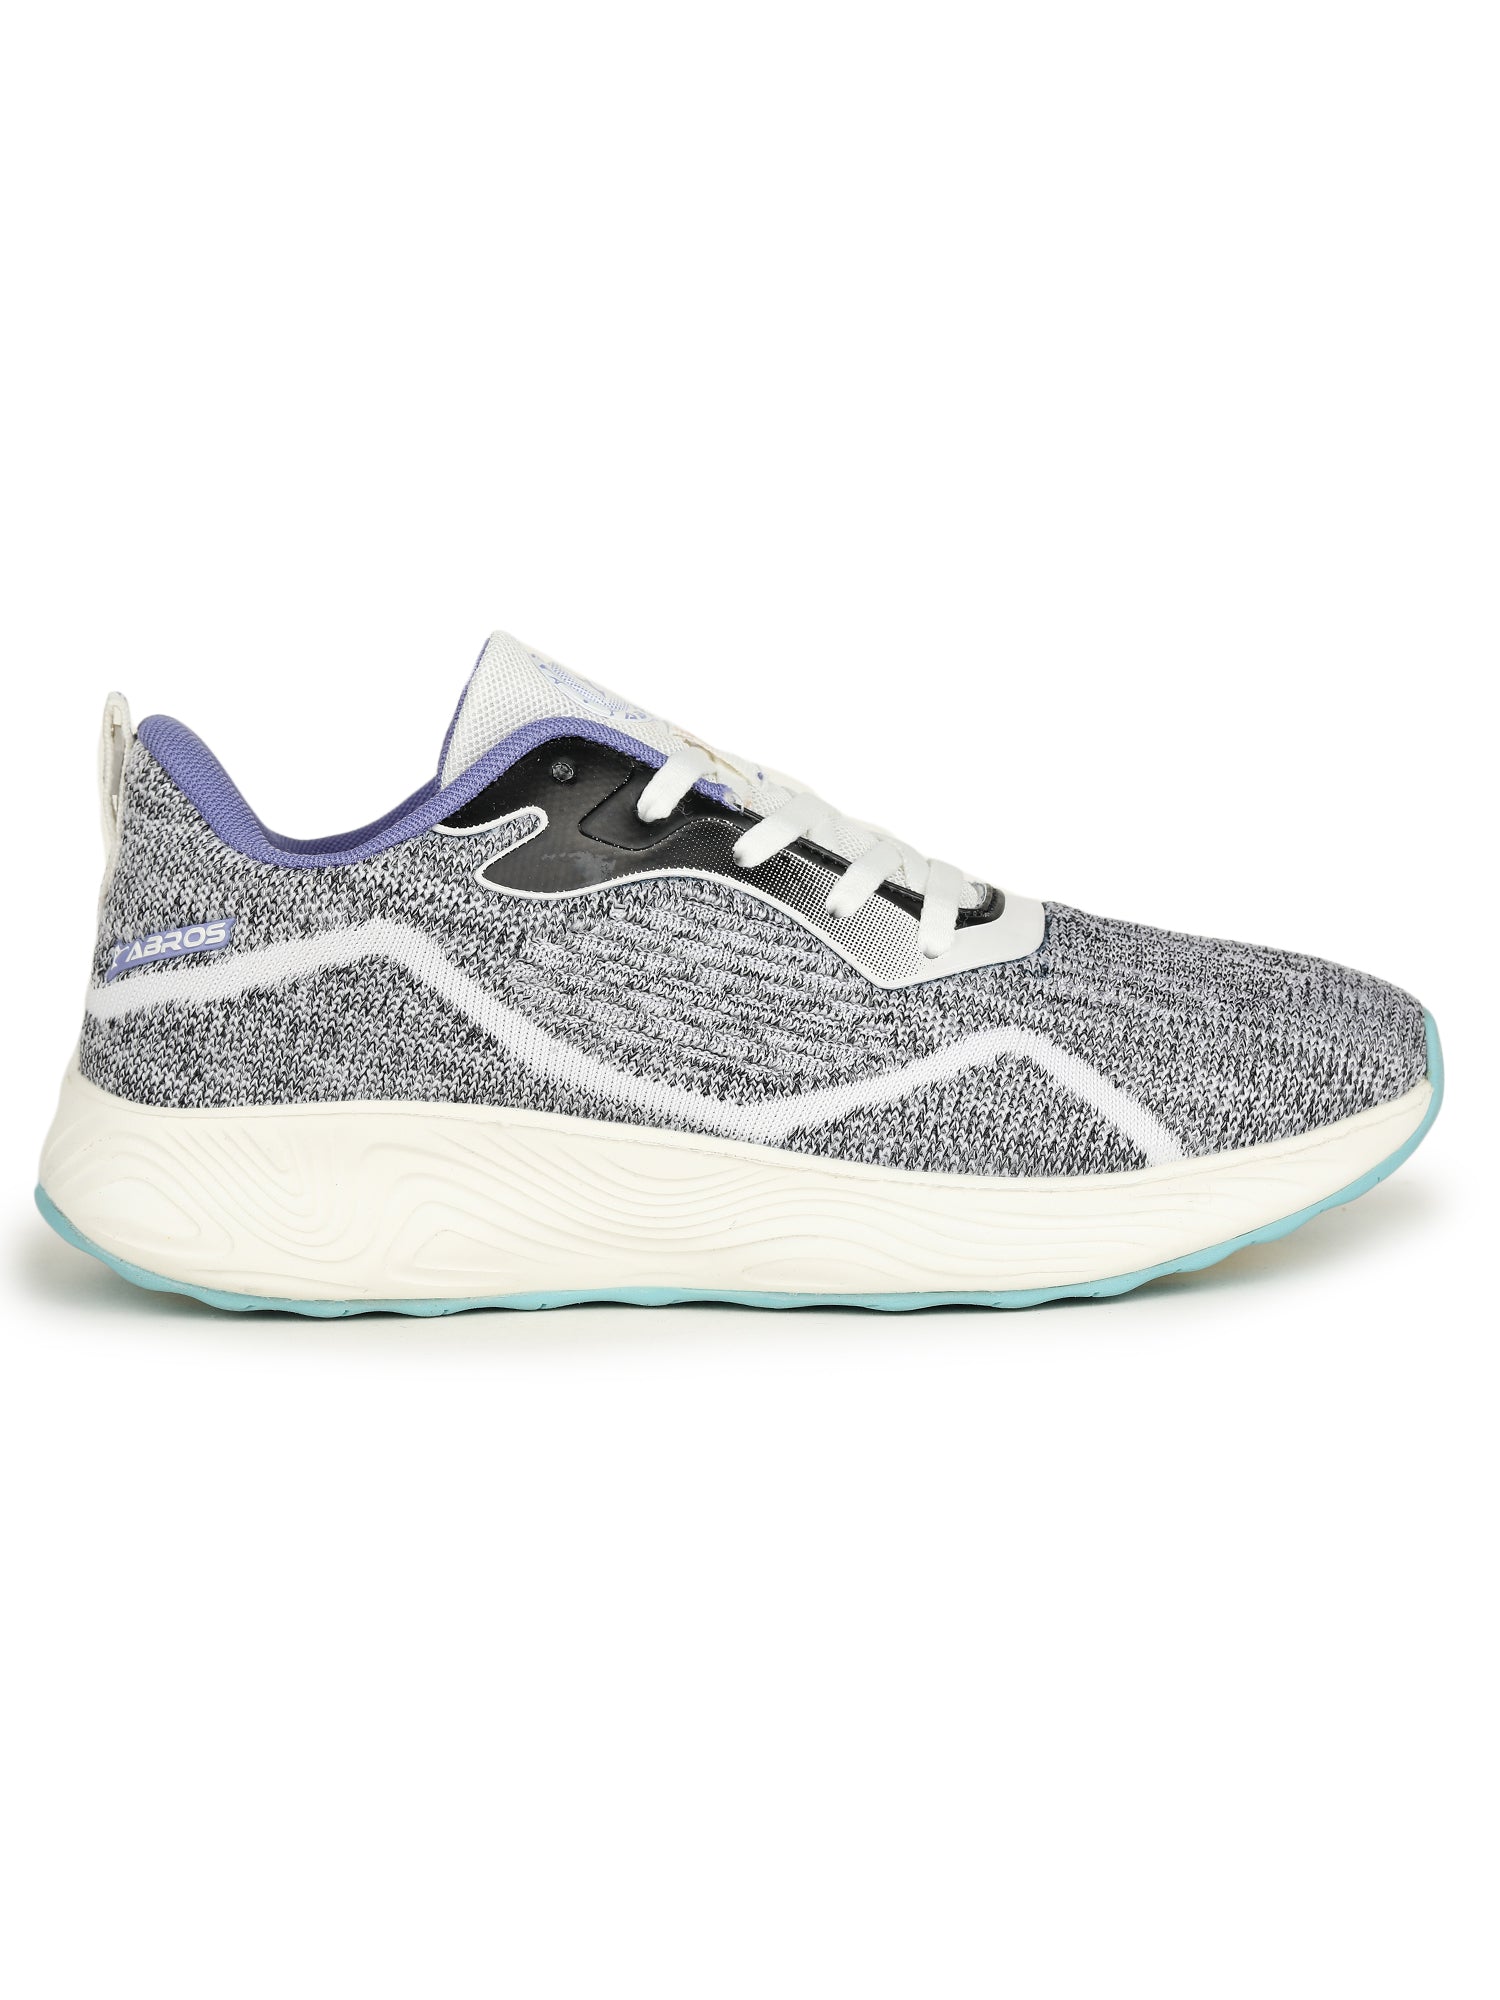 CORAL SPORTS SHOES FOR WOMEN